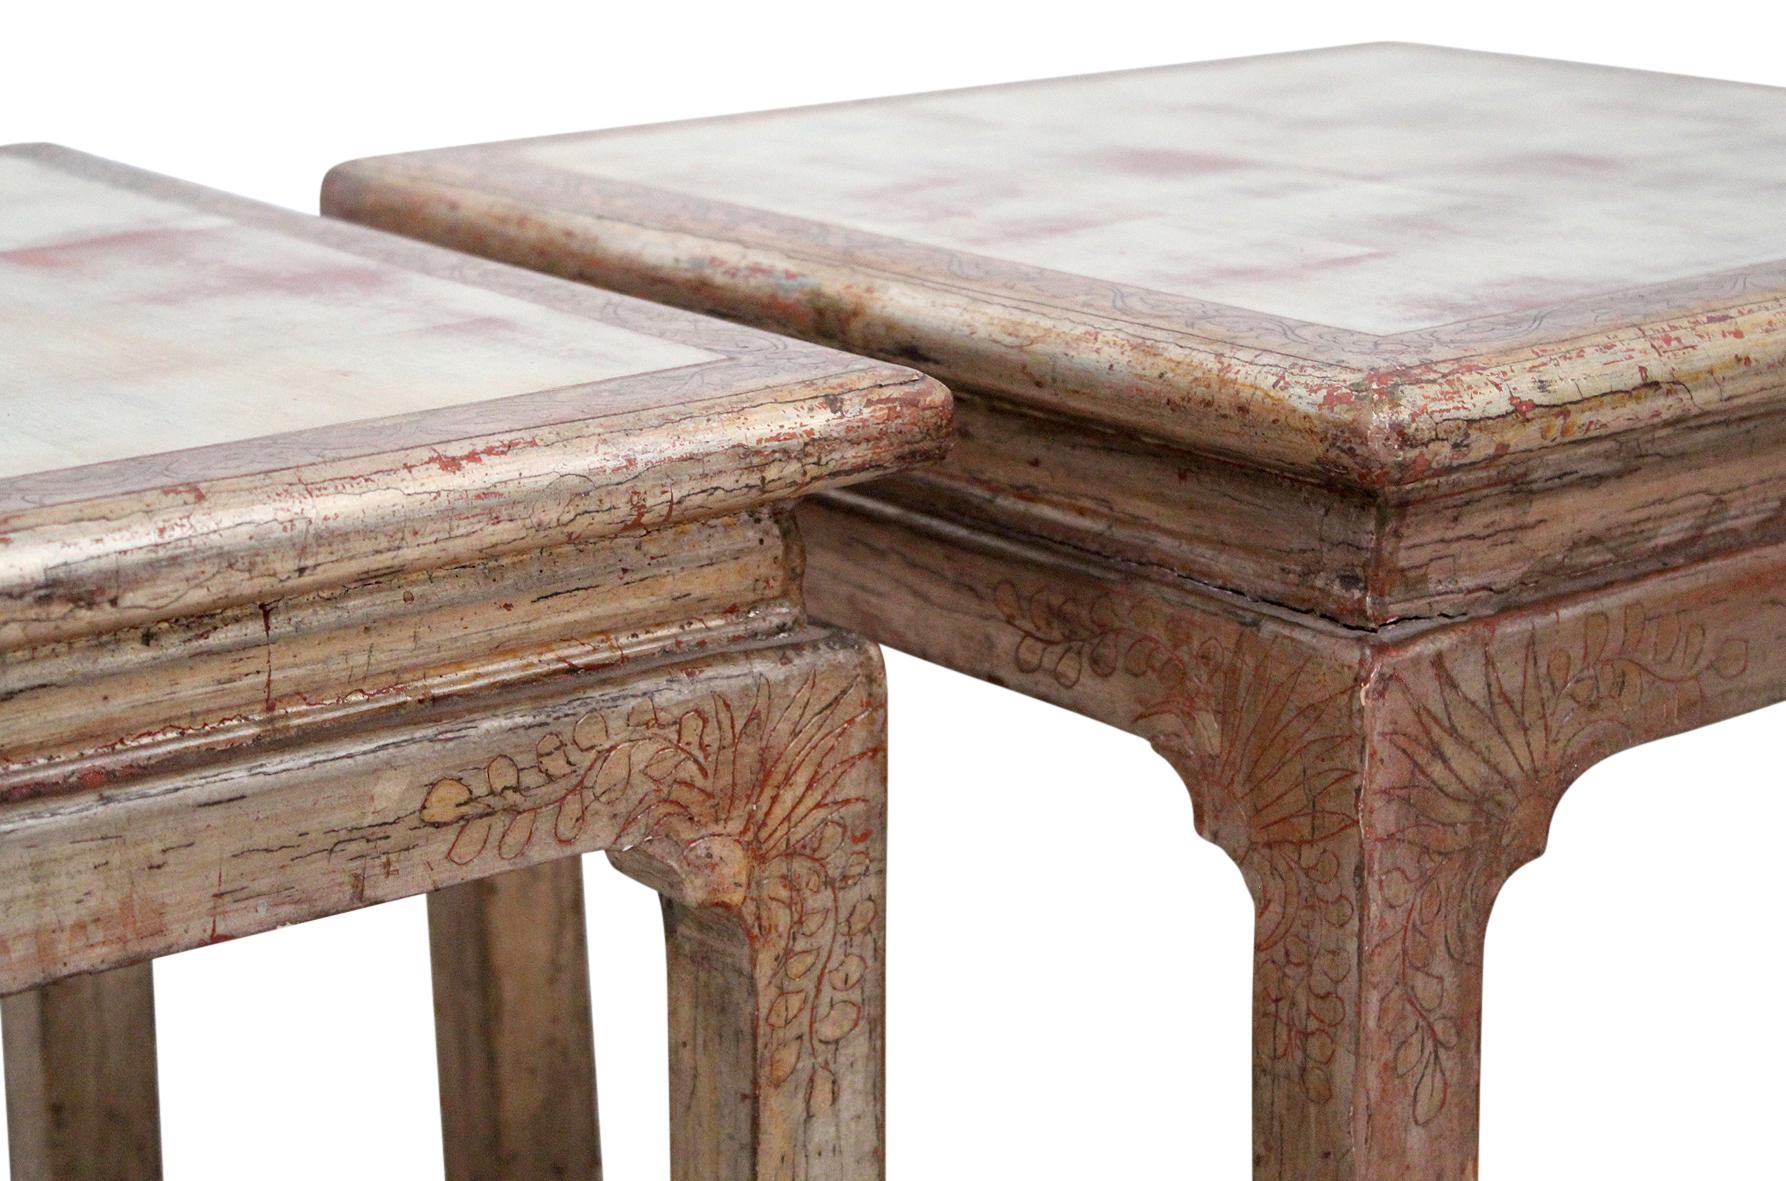 Silver Leaf Pair of Side Tables by Max Kuehne